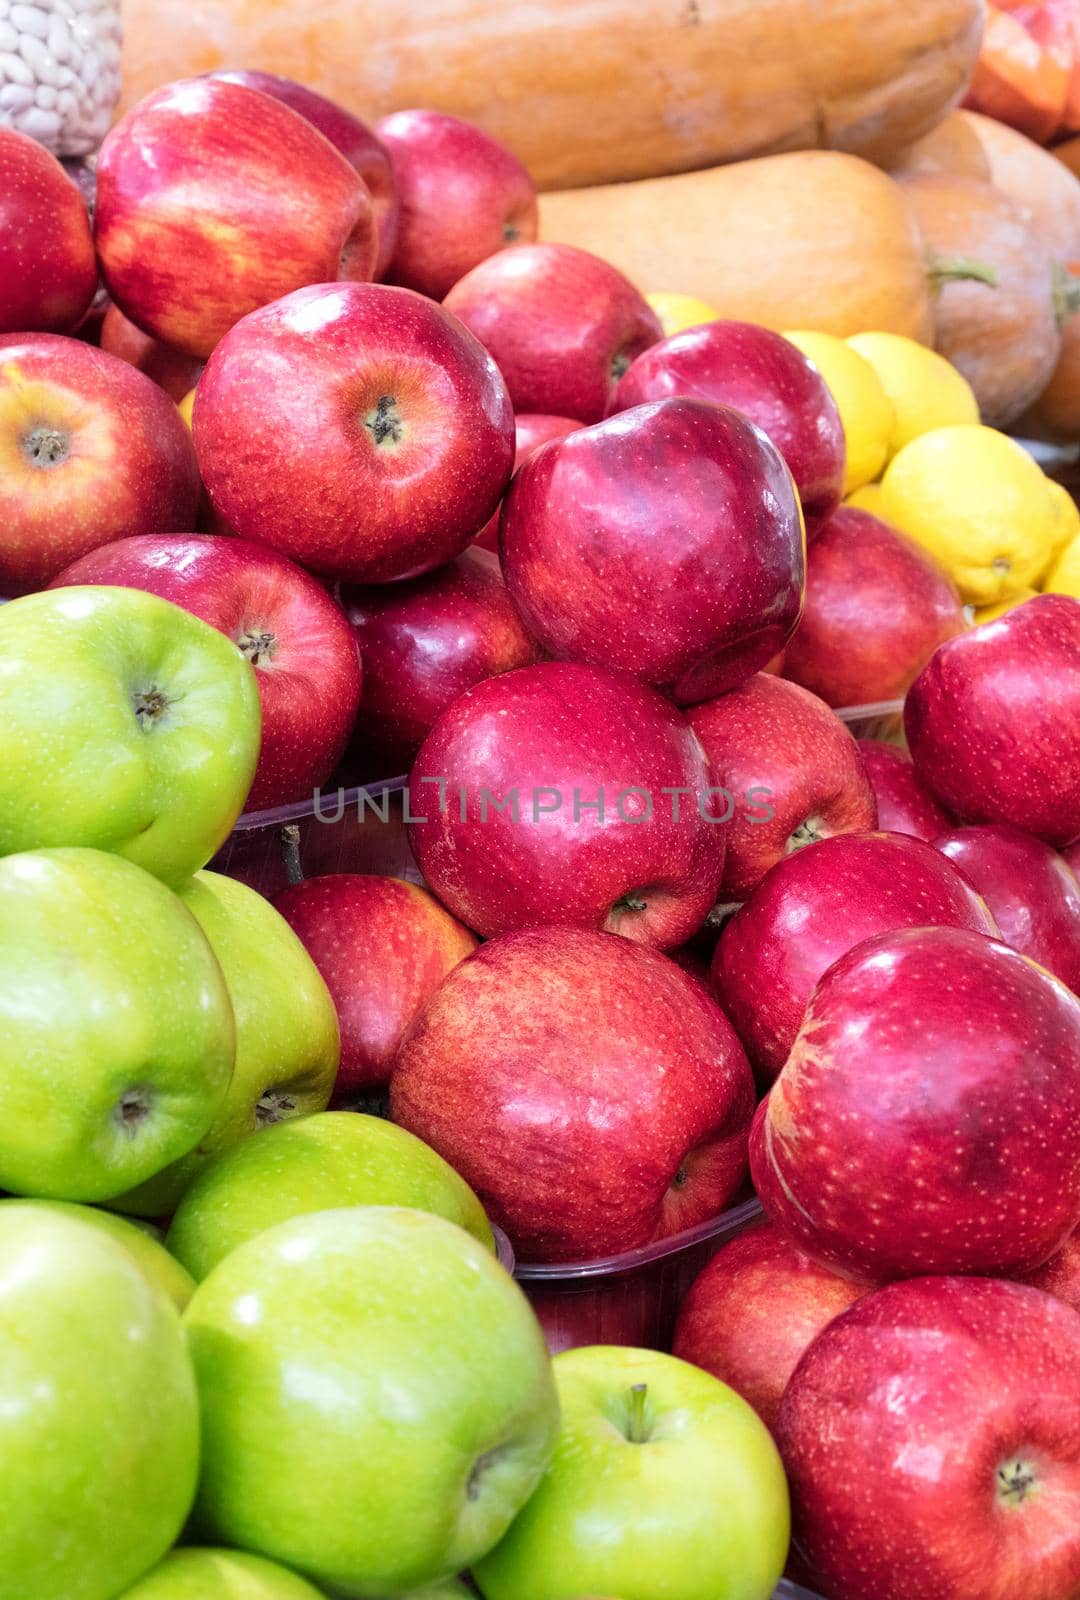 Red and green apples are stacked in a heap on the market counter and attract the attention of buyers. by Sergii